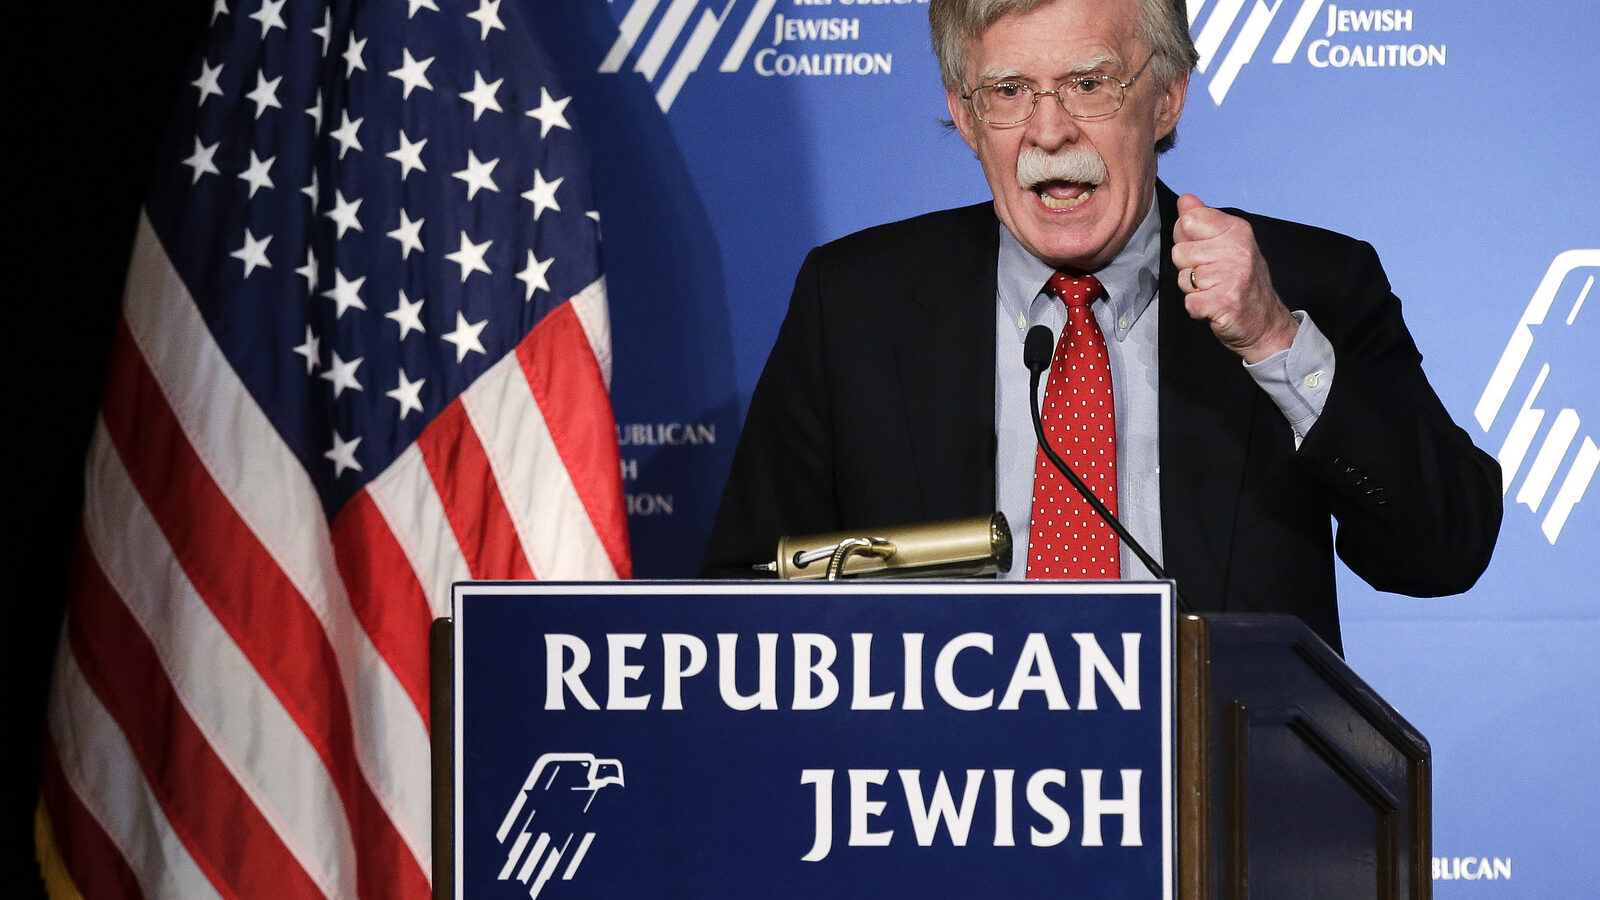 Former U.S. ambassador to the U.N. John Bolton speaks at the Republican Jewish Coalition Saturday, March 29, 2014, in Las Vegas. (AP Photo/Julie Jacobson)